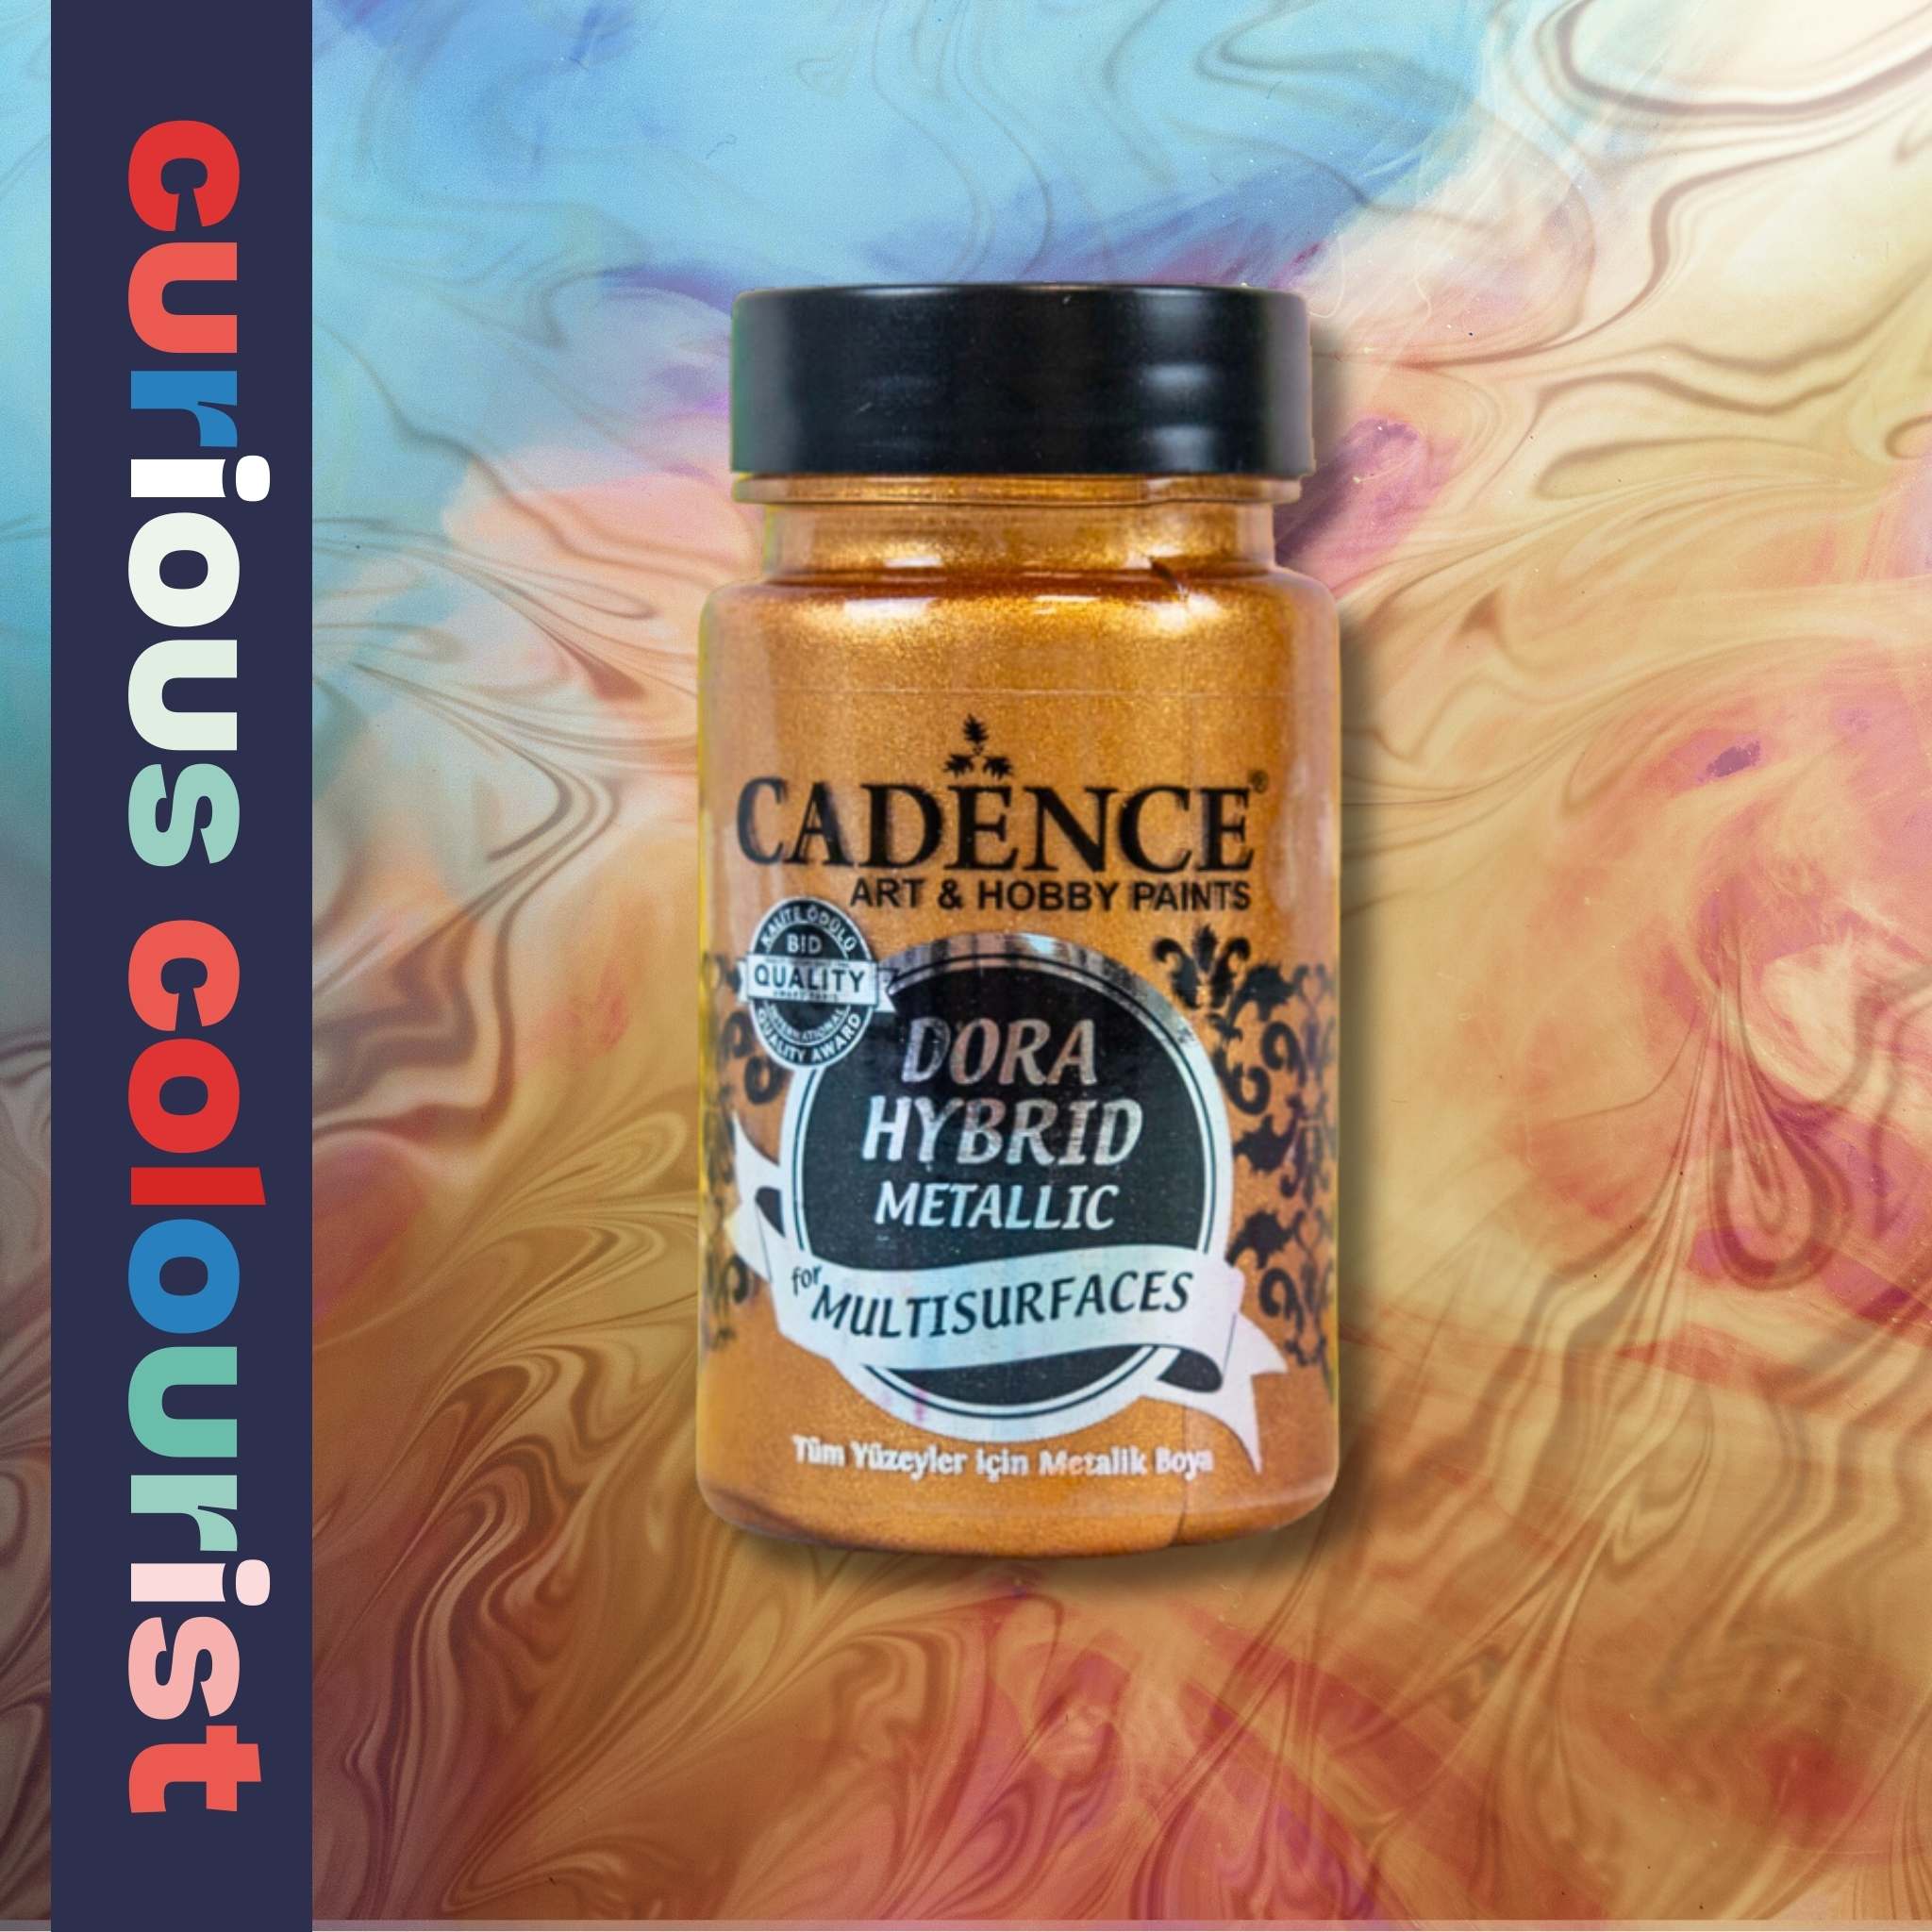 Bronze Two tone metallic paint from Cadence that will give your leather craft projects a glitter and shine - use to as paint effects, re-colour or personalise your leather shoes or bags.